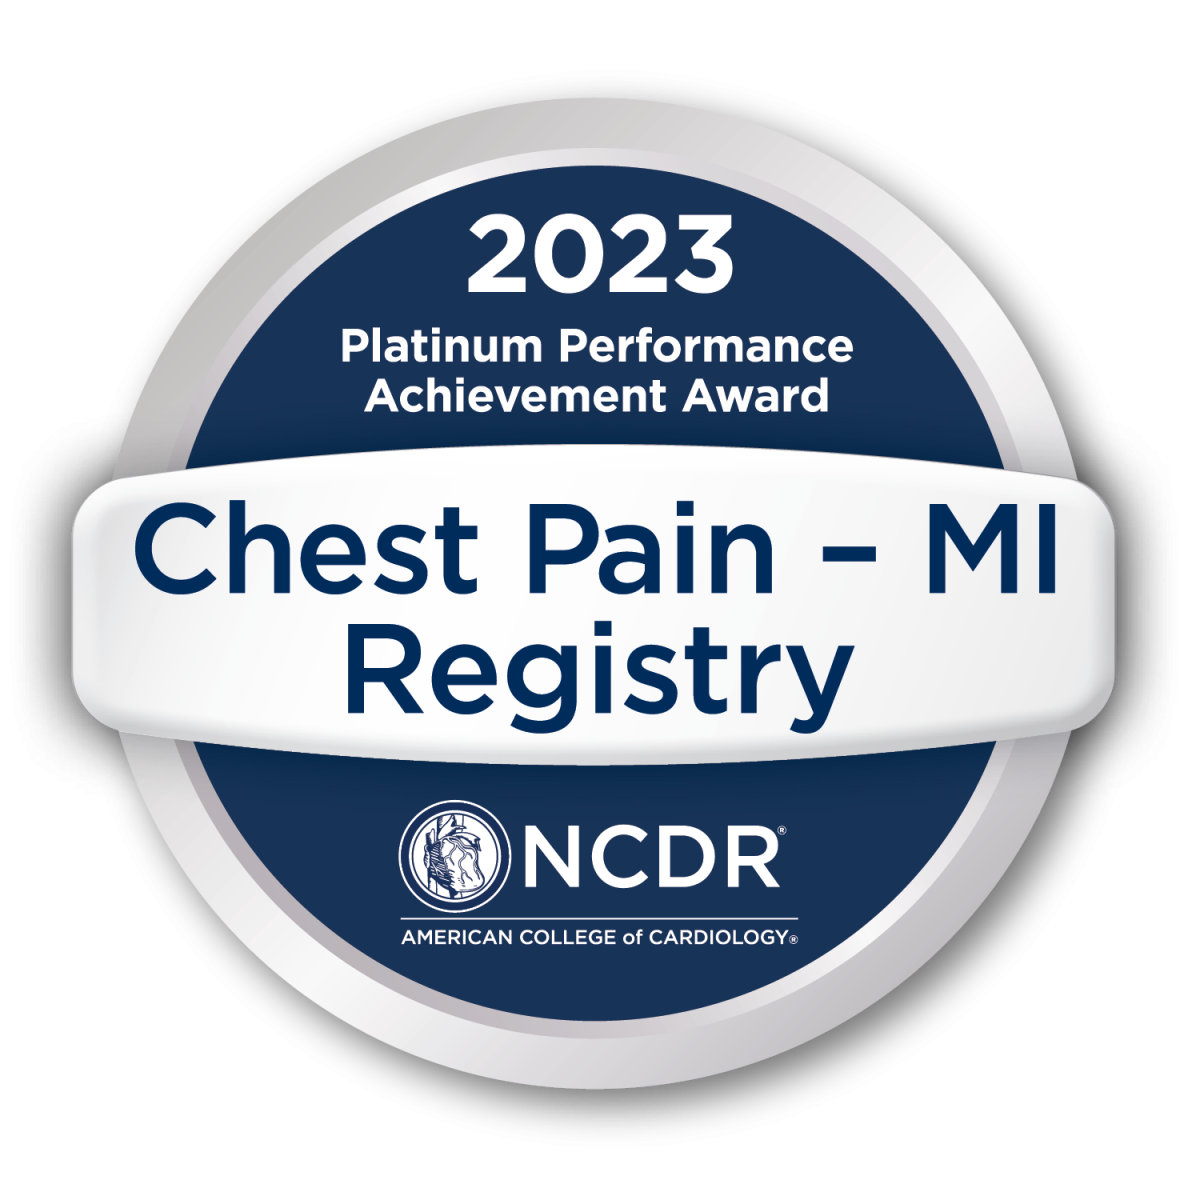 2023 Platinum Performance Achievement Award Chest Pain - MI Registry NCDR American College of Cardiology